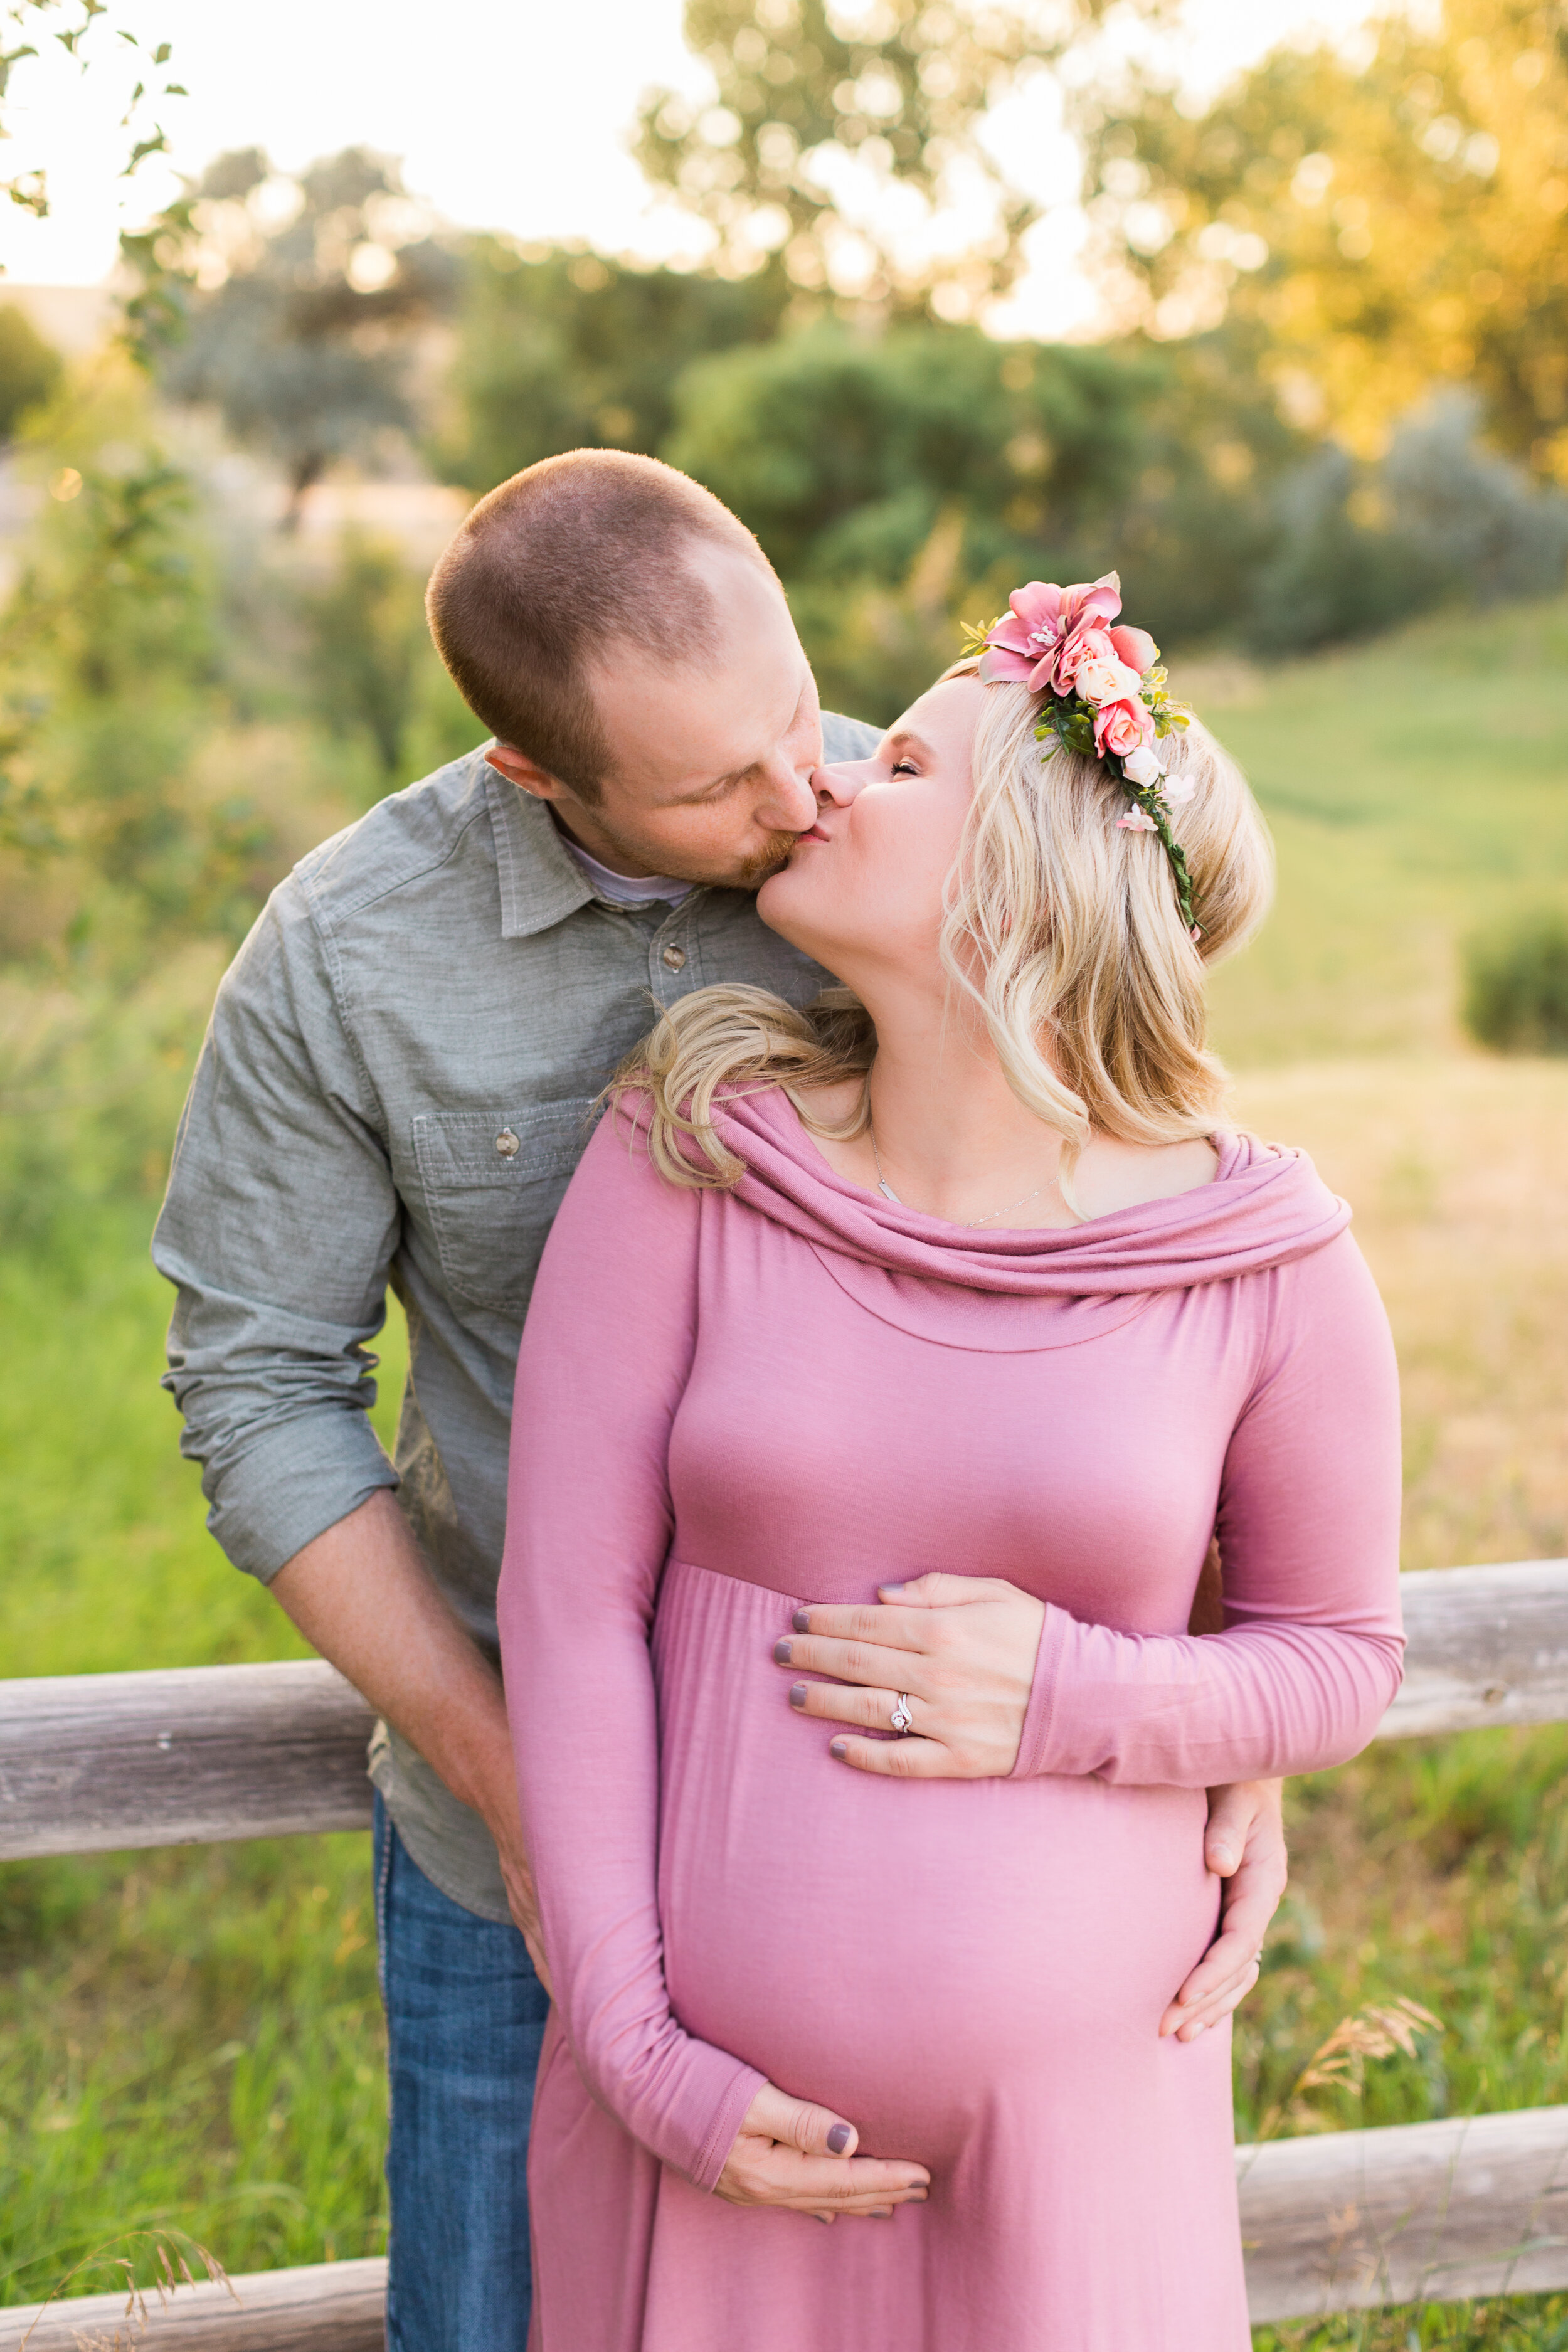 What Should I Wear to My Maternity Photoshoot? - Morning Light